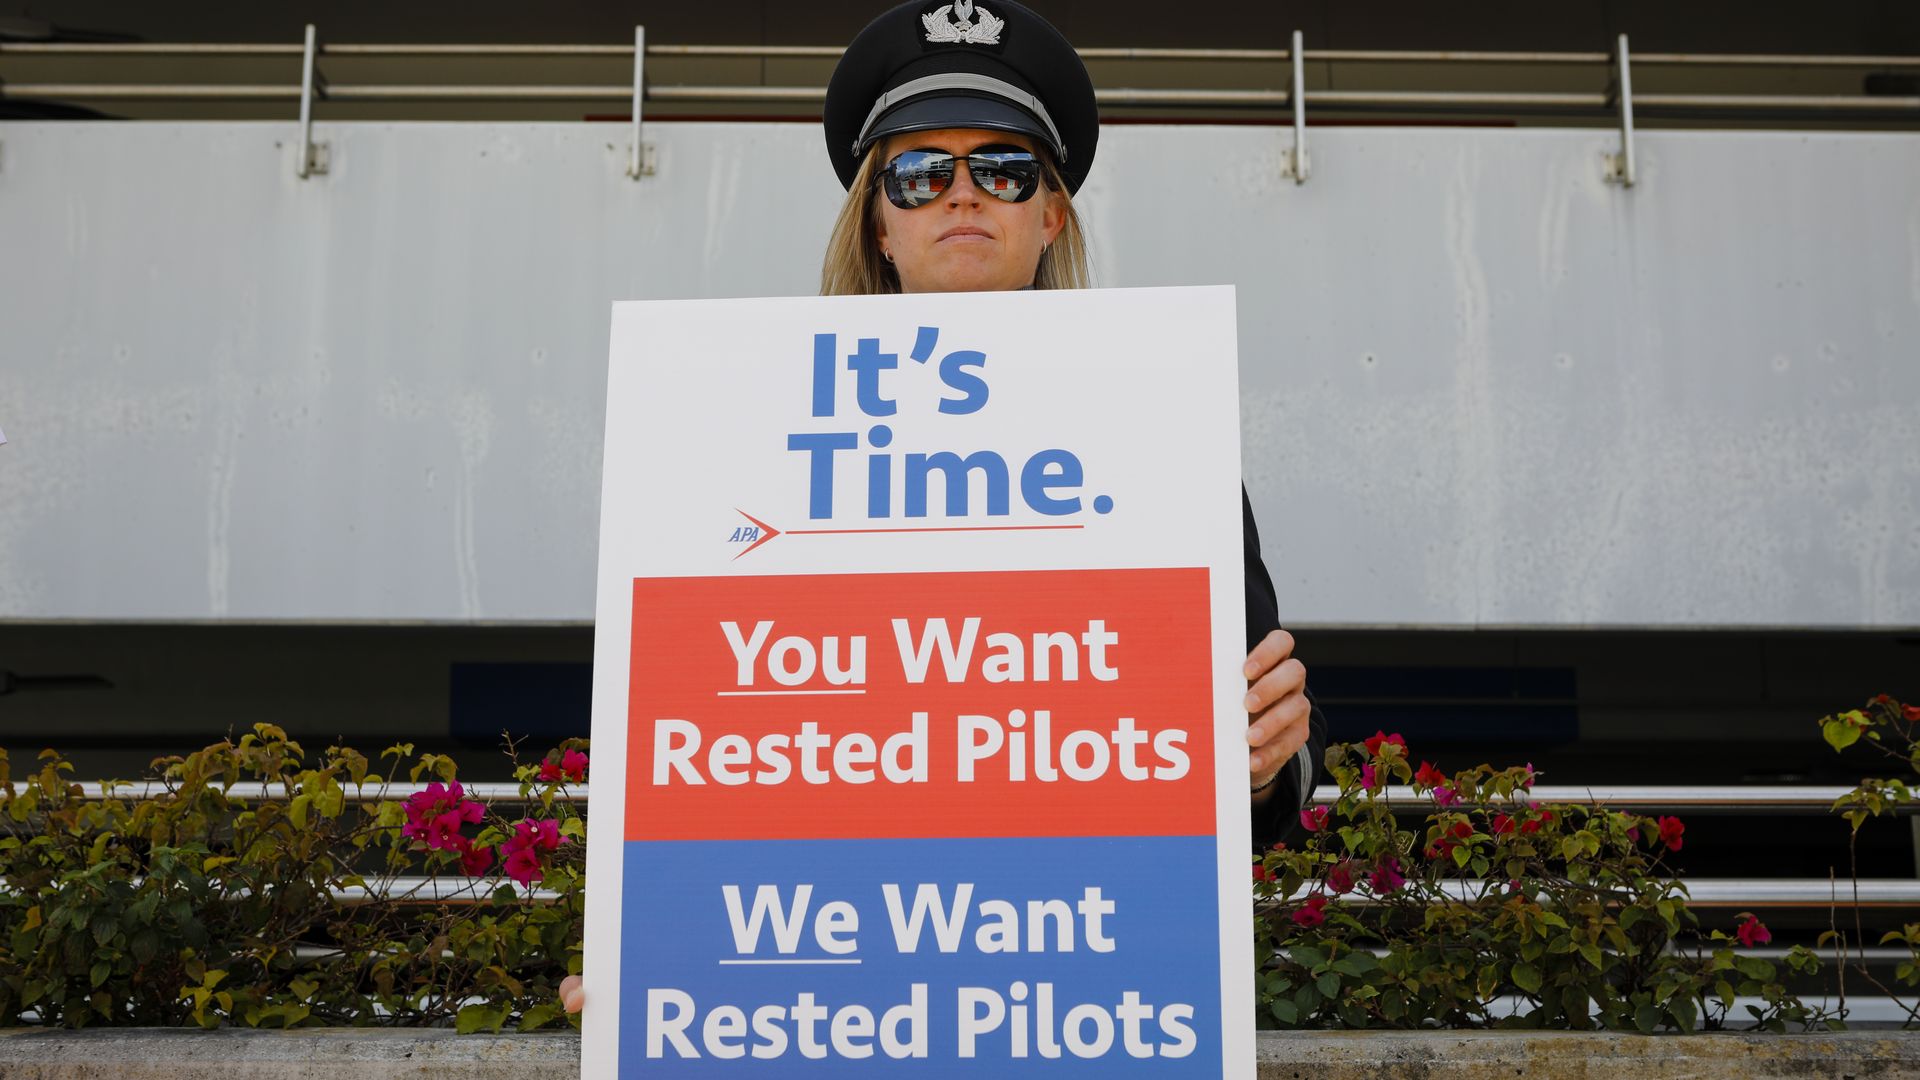 A pilot picketing outside an airport